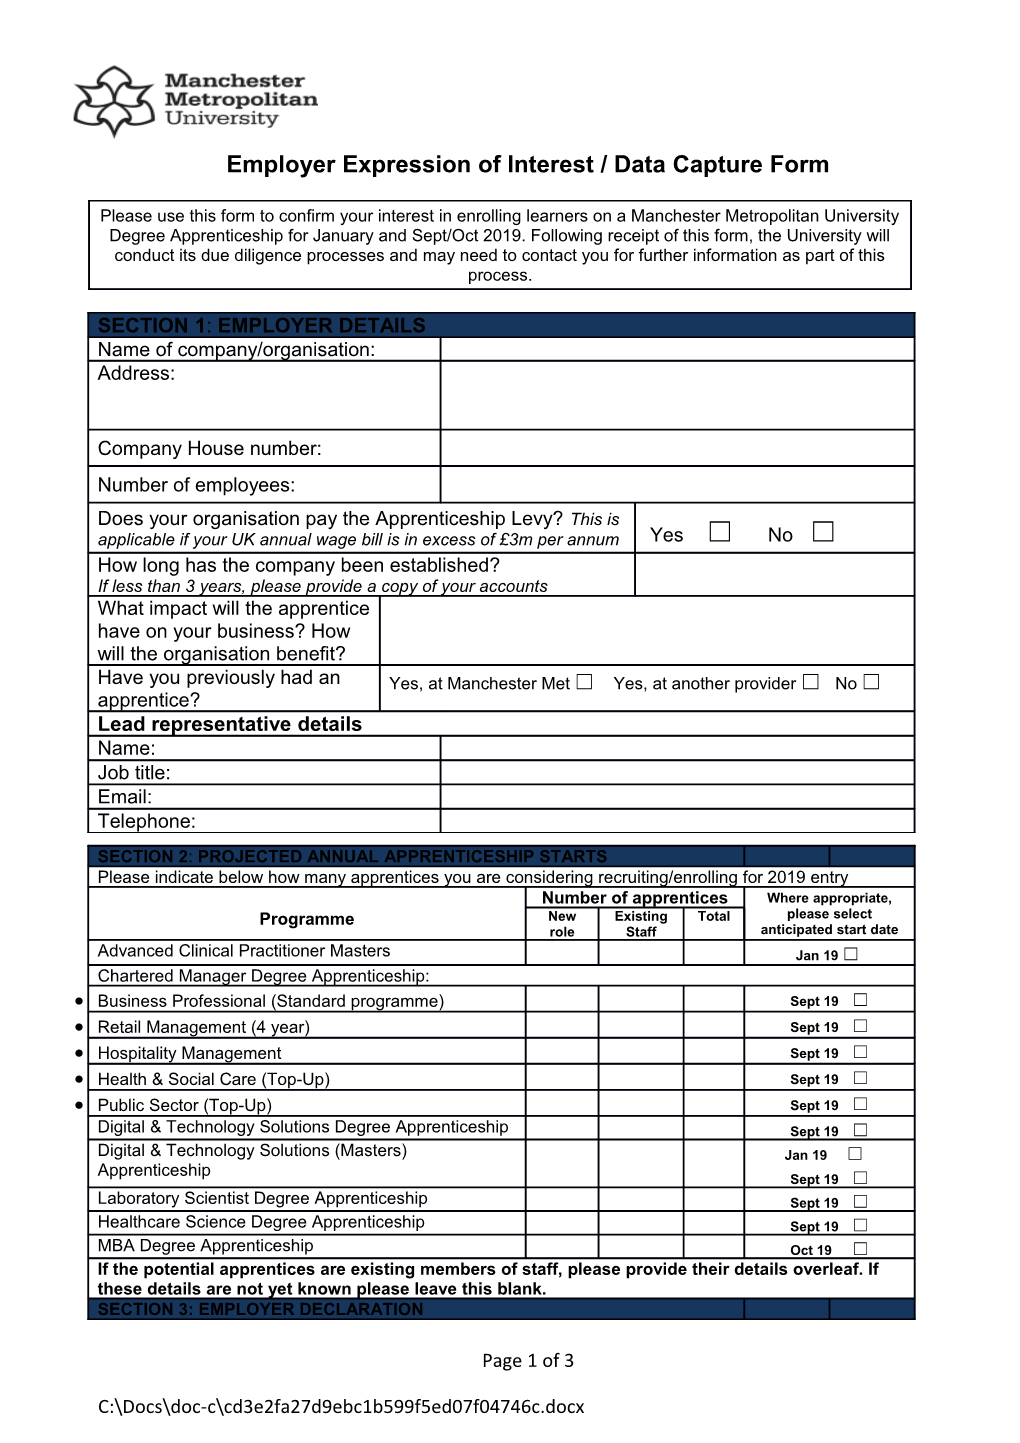 Employer Expression of Interest / Data Capture Form